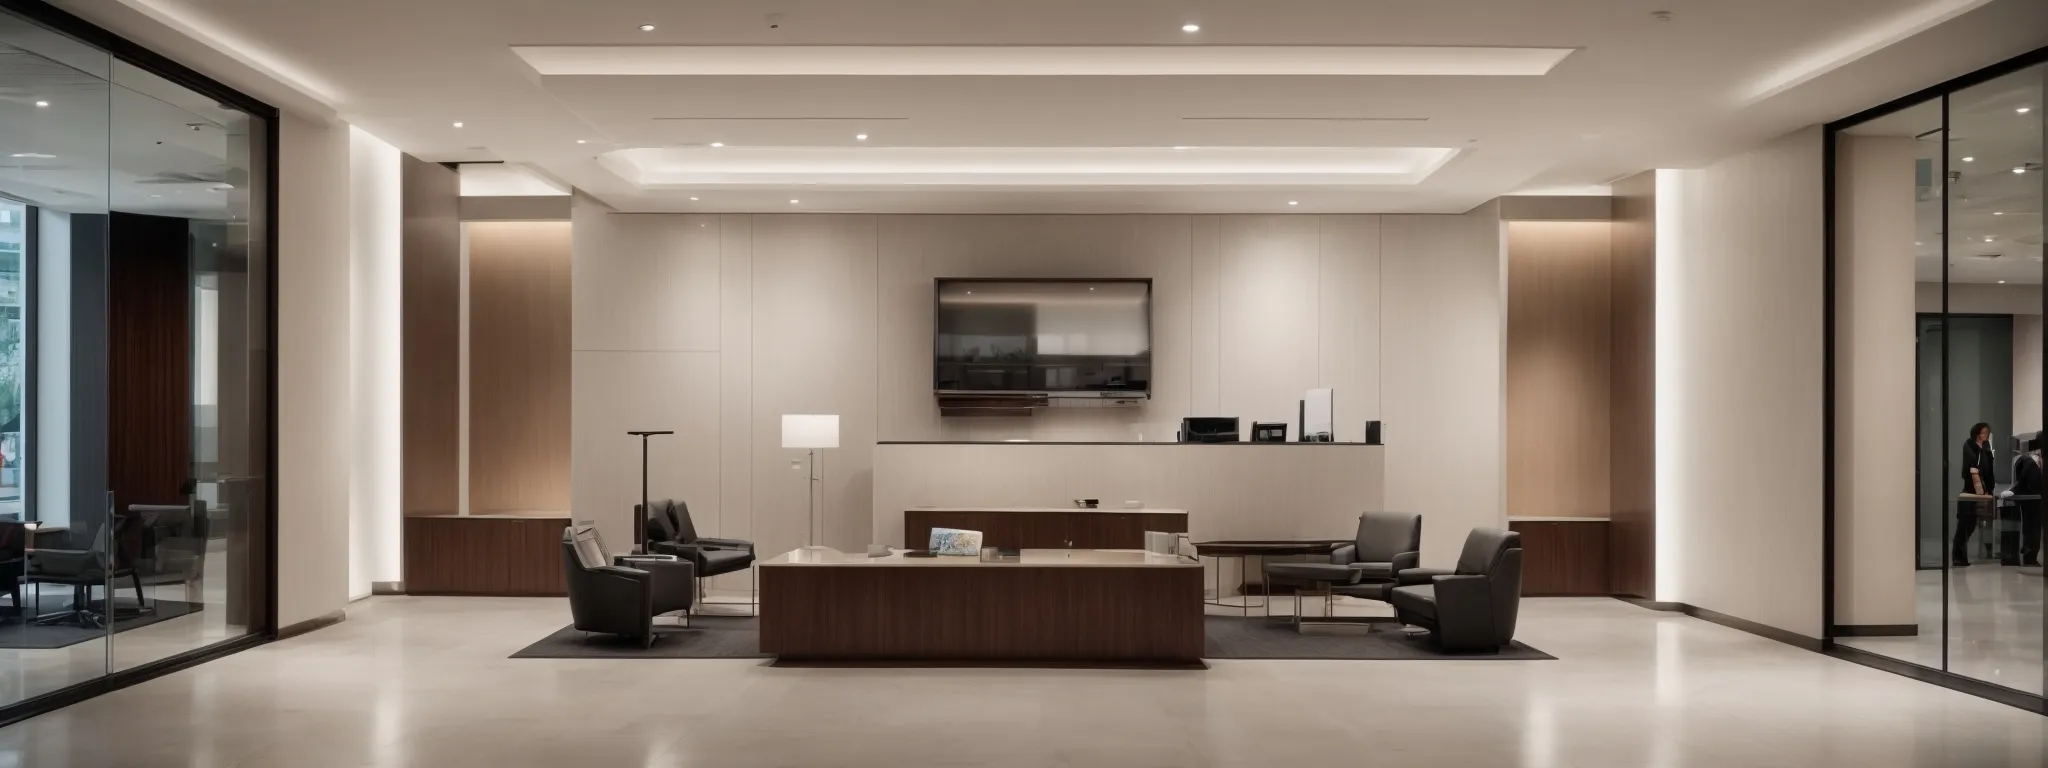 a sleek, modern law office lobby with a clean and minimalist design, emphasizing a professional and technologically advanced atmosphere.